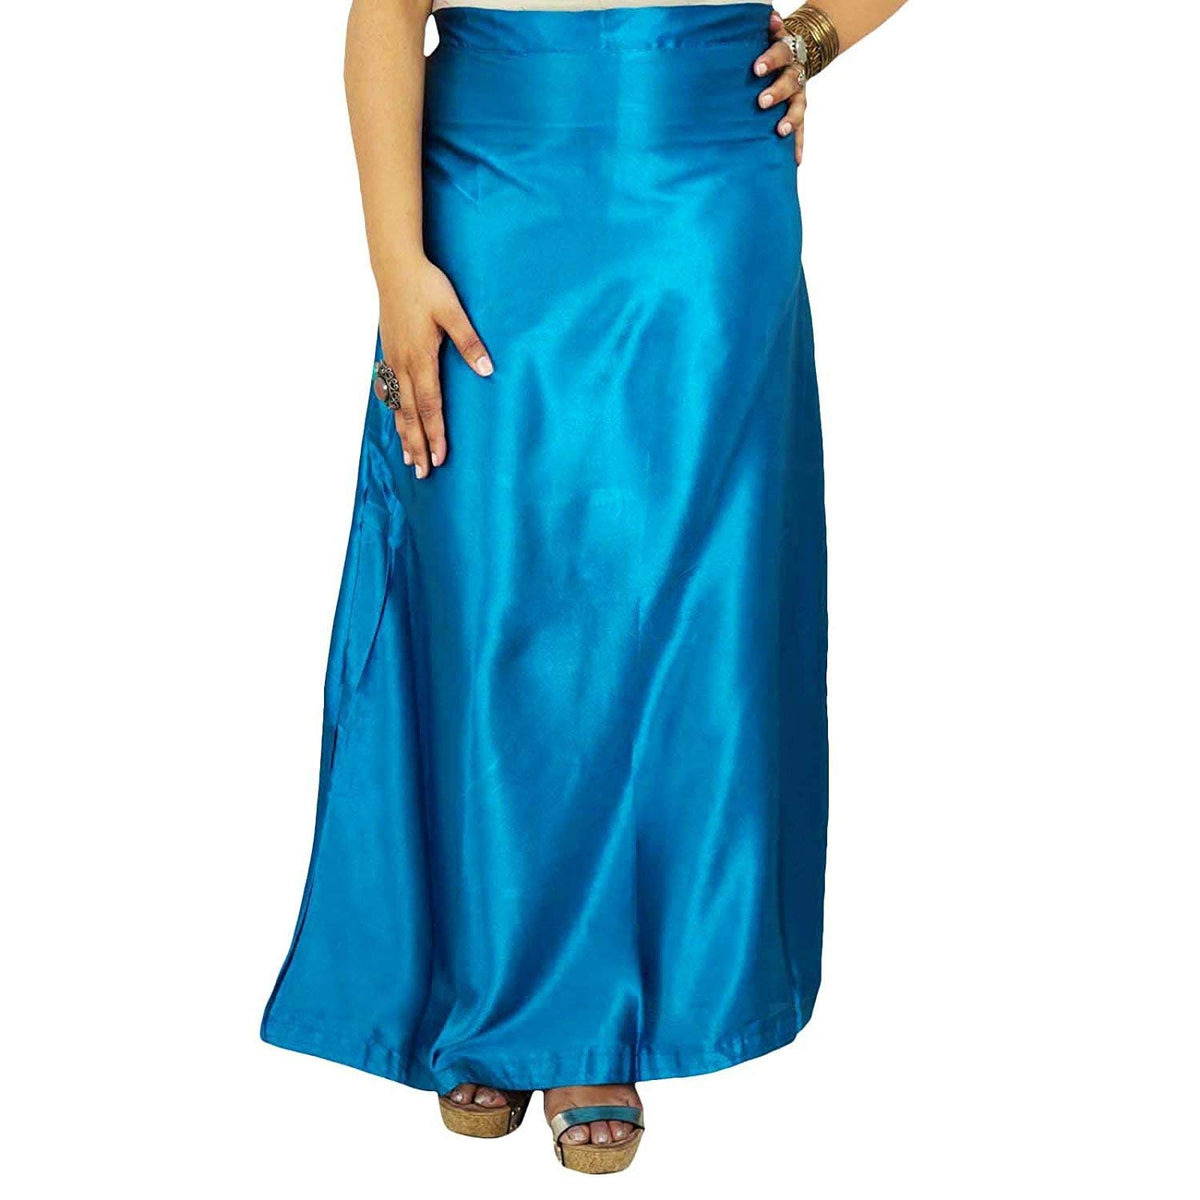 Readymade Petticoats in Blue Color for Saree (Satin)– PAAIE